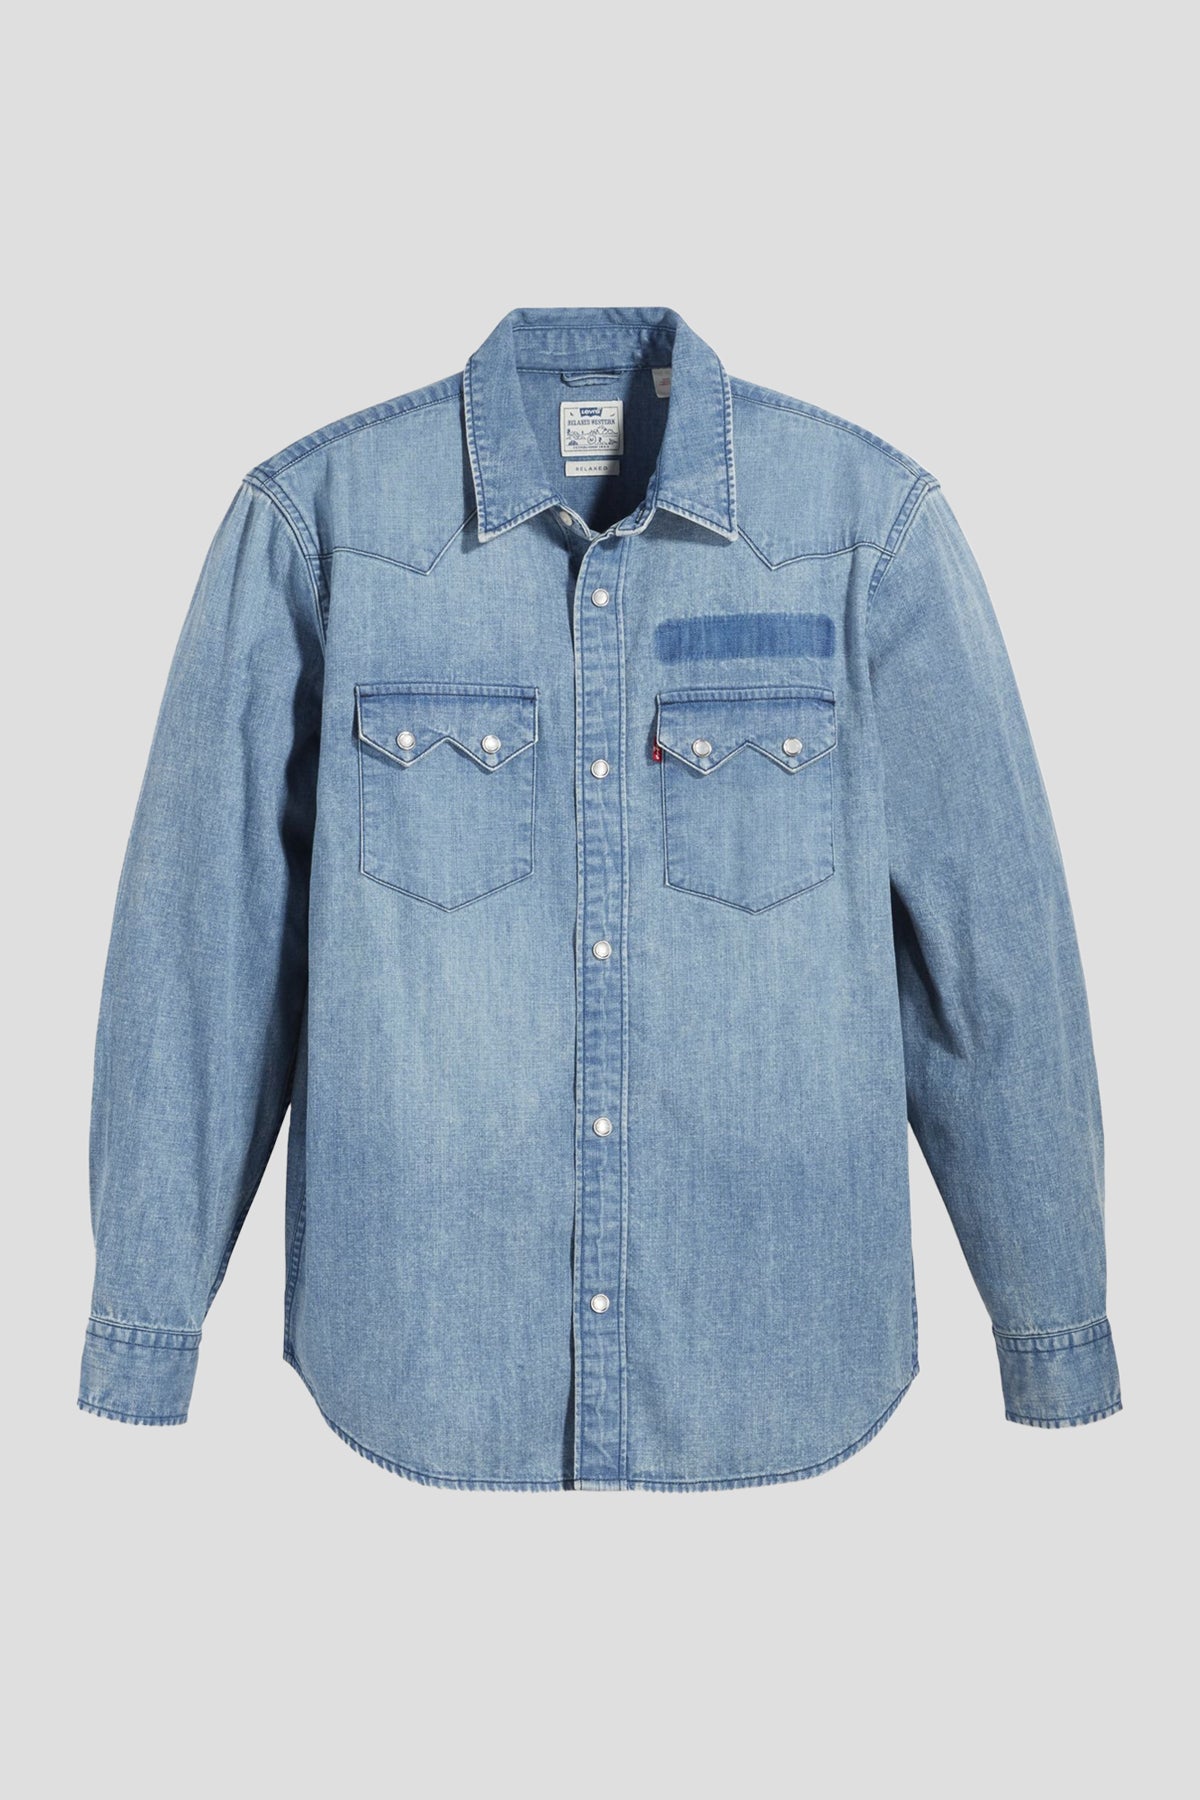 Levi's Sawtooth Western Shirt in Marcy Marcy / Large